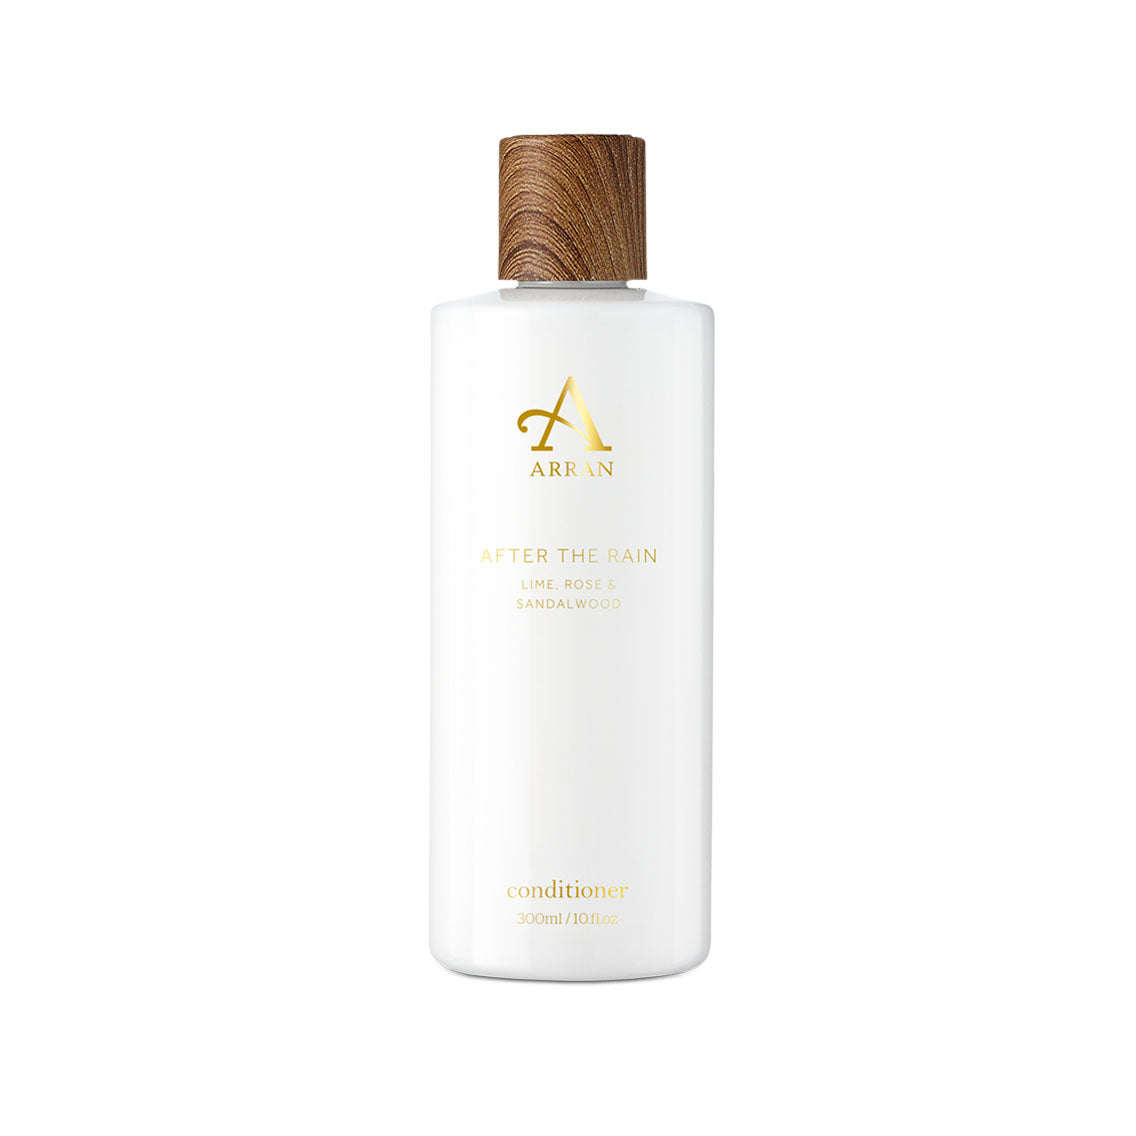 An image of ARRAN After the Rain 300ml Conditioner | Made in Scotland | Lime, Rose & Sandalw...